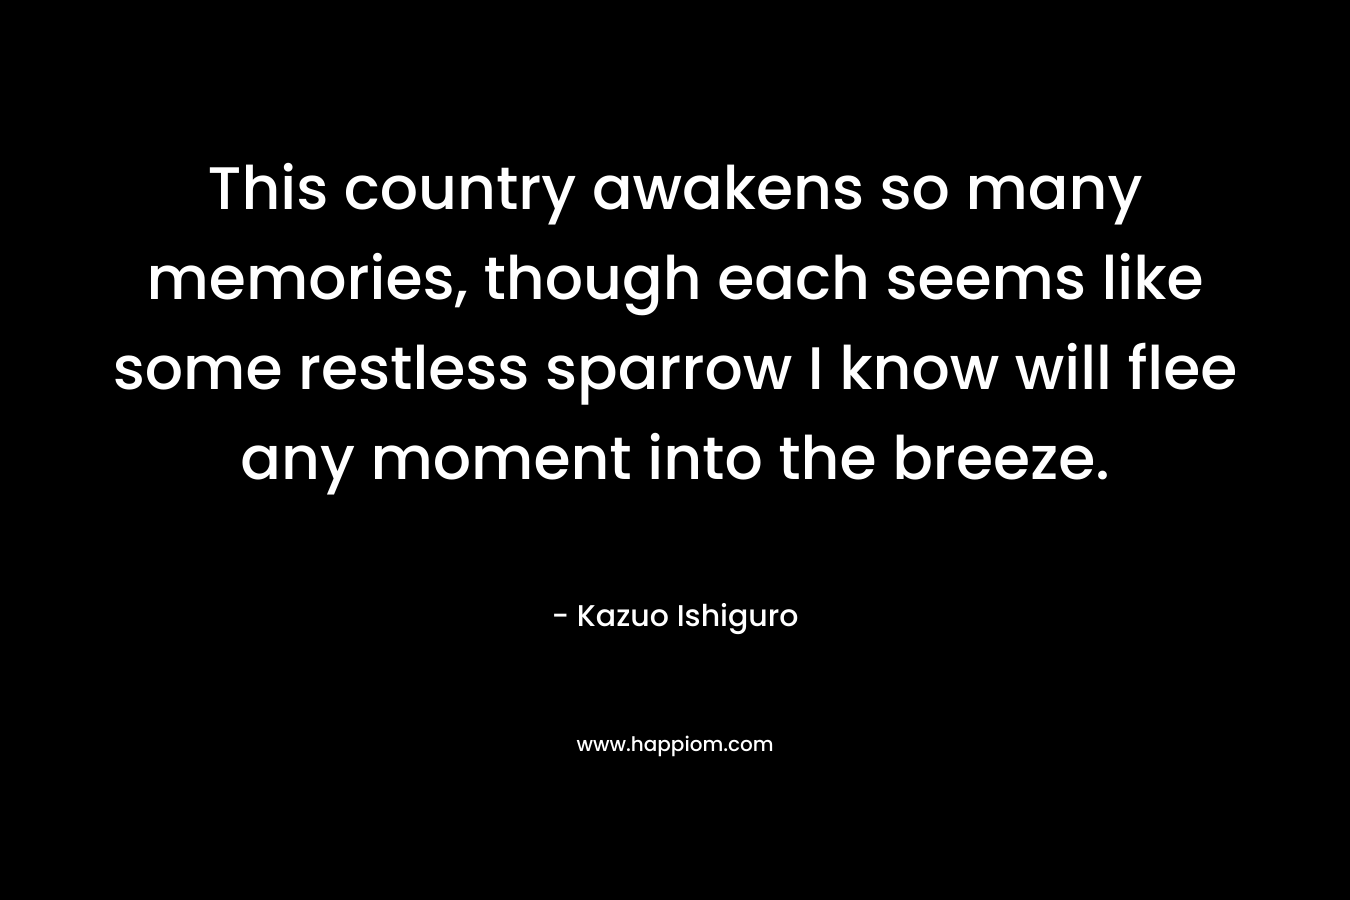 This country awakens so many memories, though each seems like some restless sparrow I know will flee any moment into the breeze. – Kazuo Ishiguro